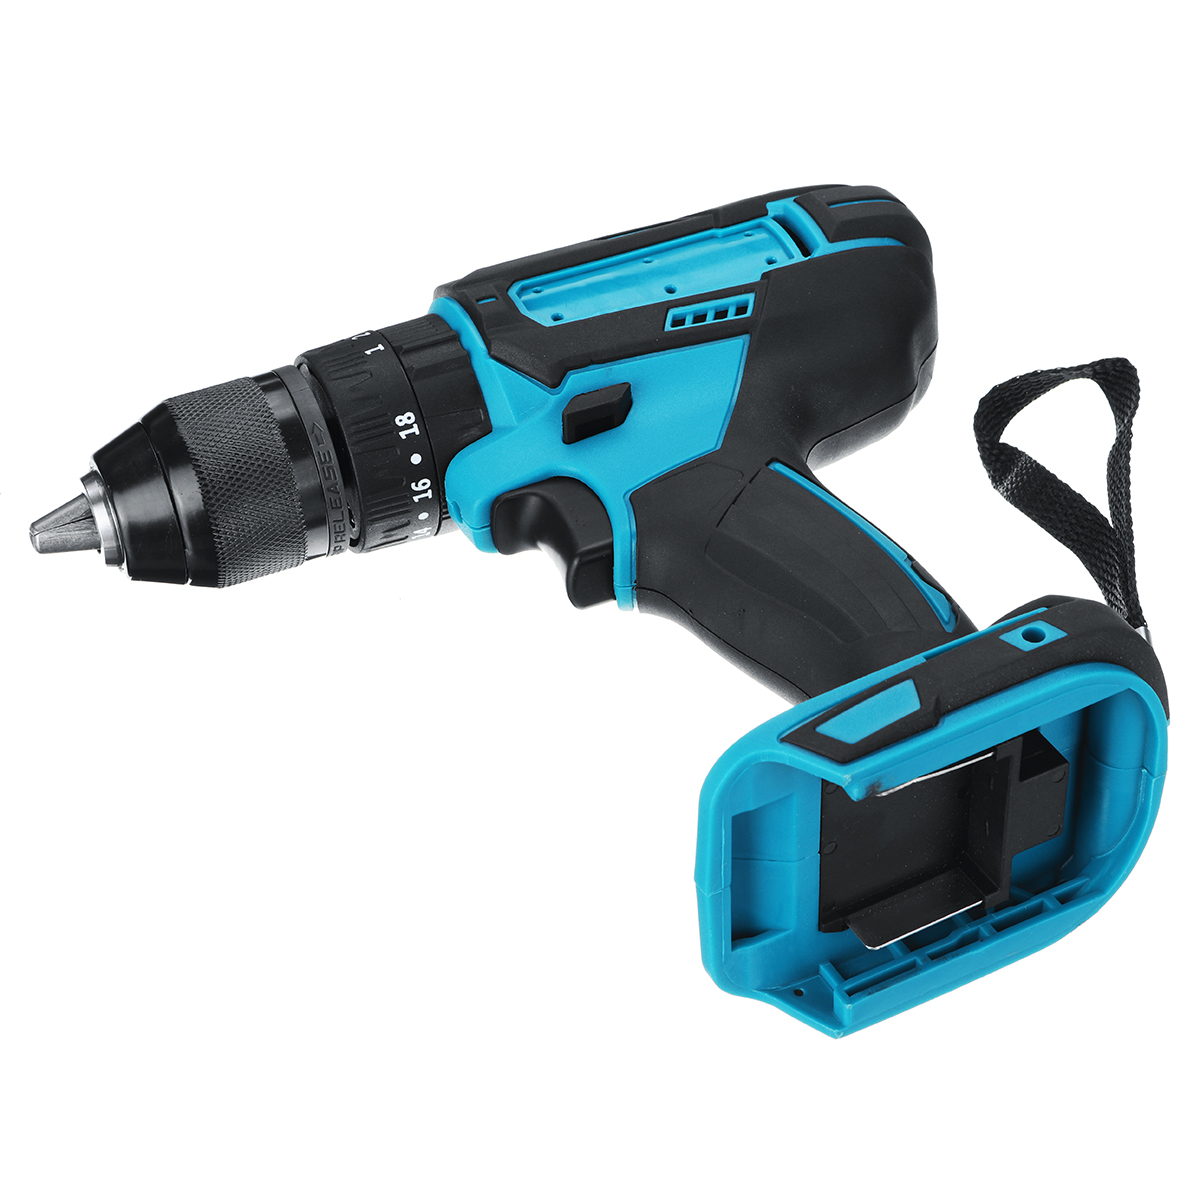 10mm-Chuck-Impact-Drill-350Nm-Cordless-Electric-Drill-For-Makita-18V-Battery-4000RPM-LED-Light-Power-1642853-12